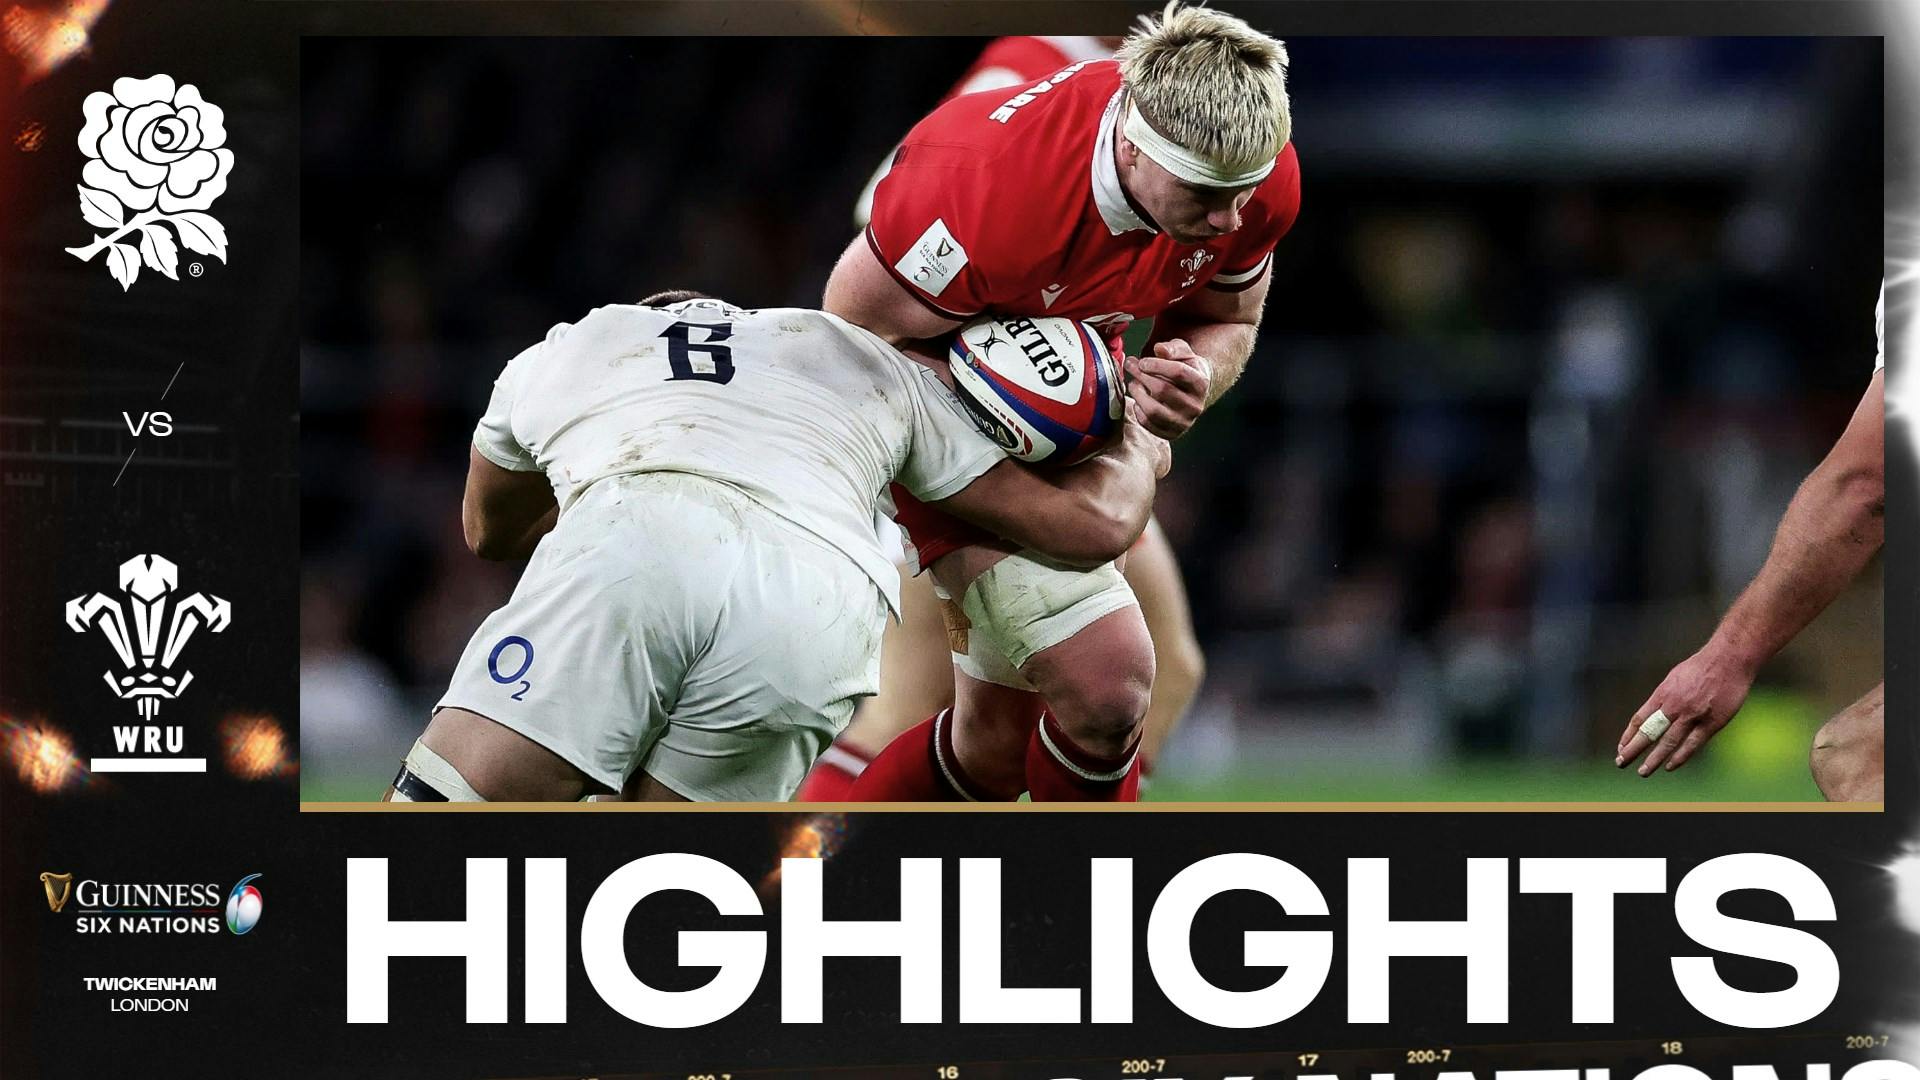 HIGHLIGHTS | ENGLAND V WALES | GUINNESS SIX NATIONS